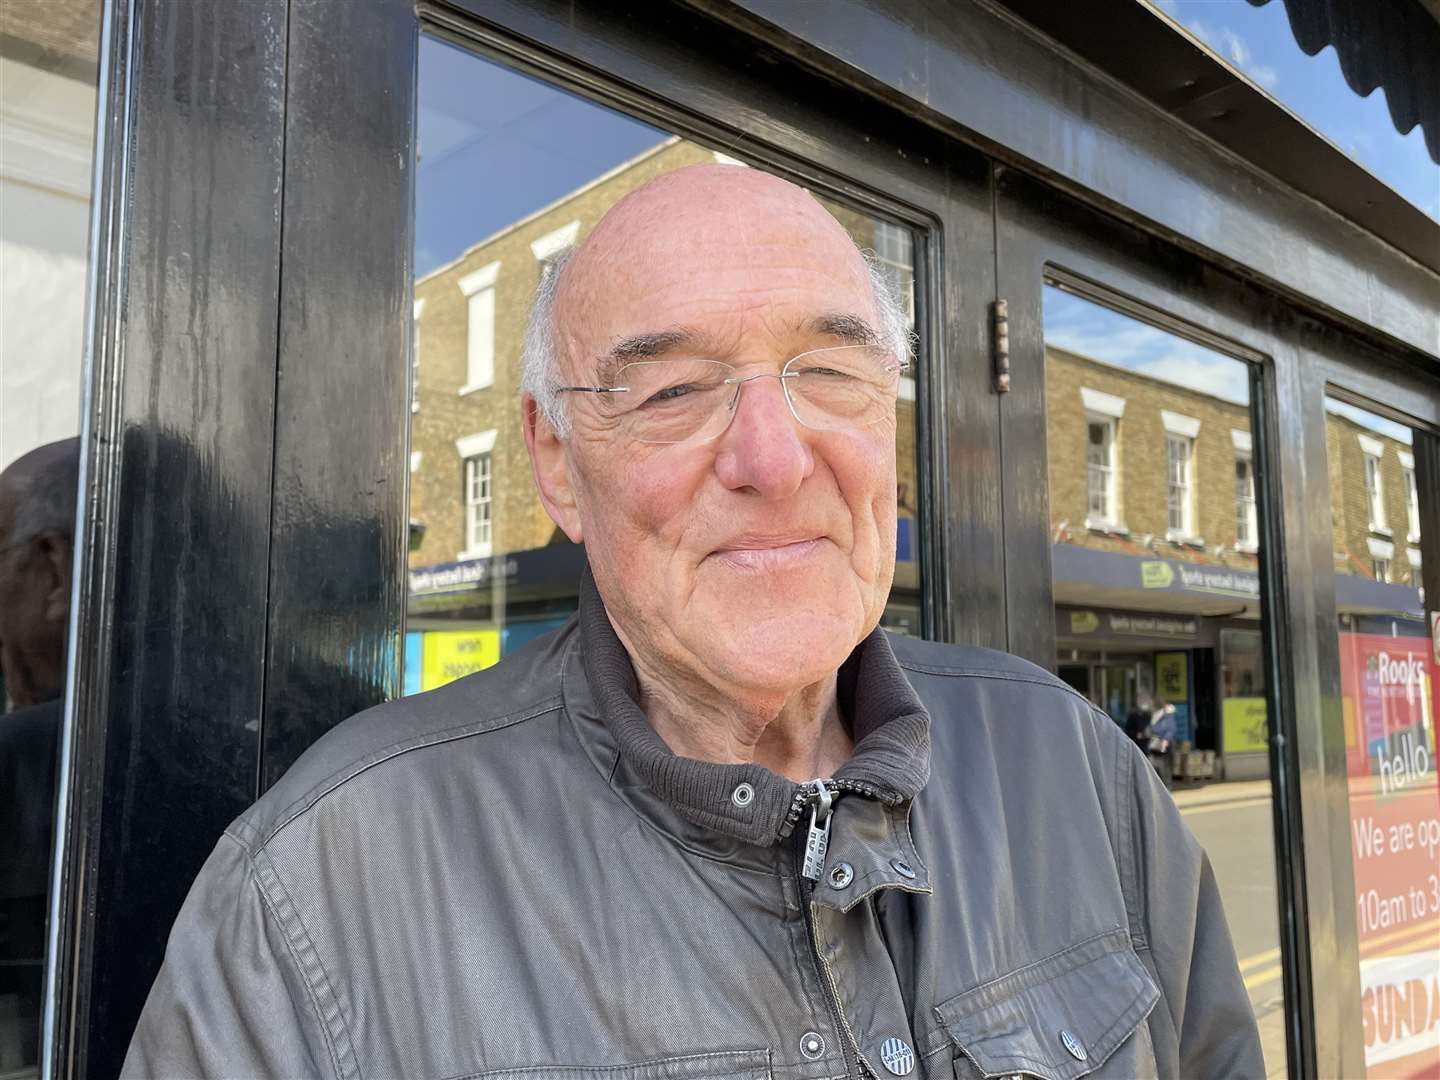 Peter Sidgewick, 74, was 'gobsmacked' over the closure